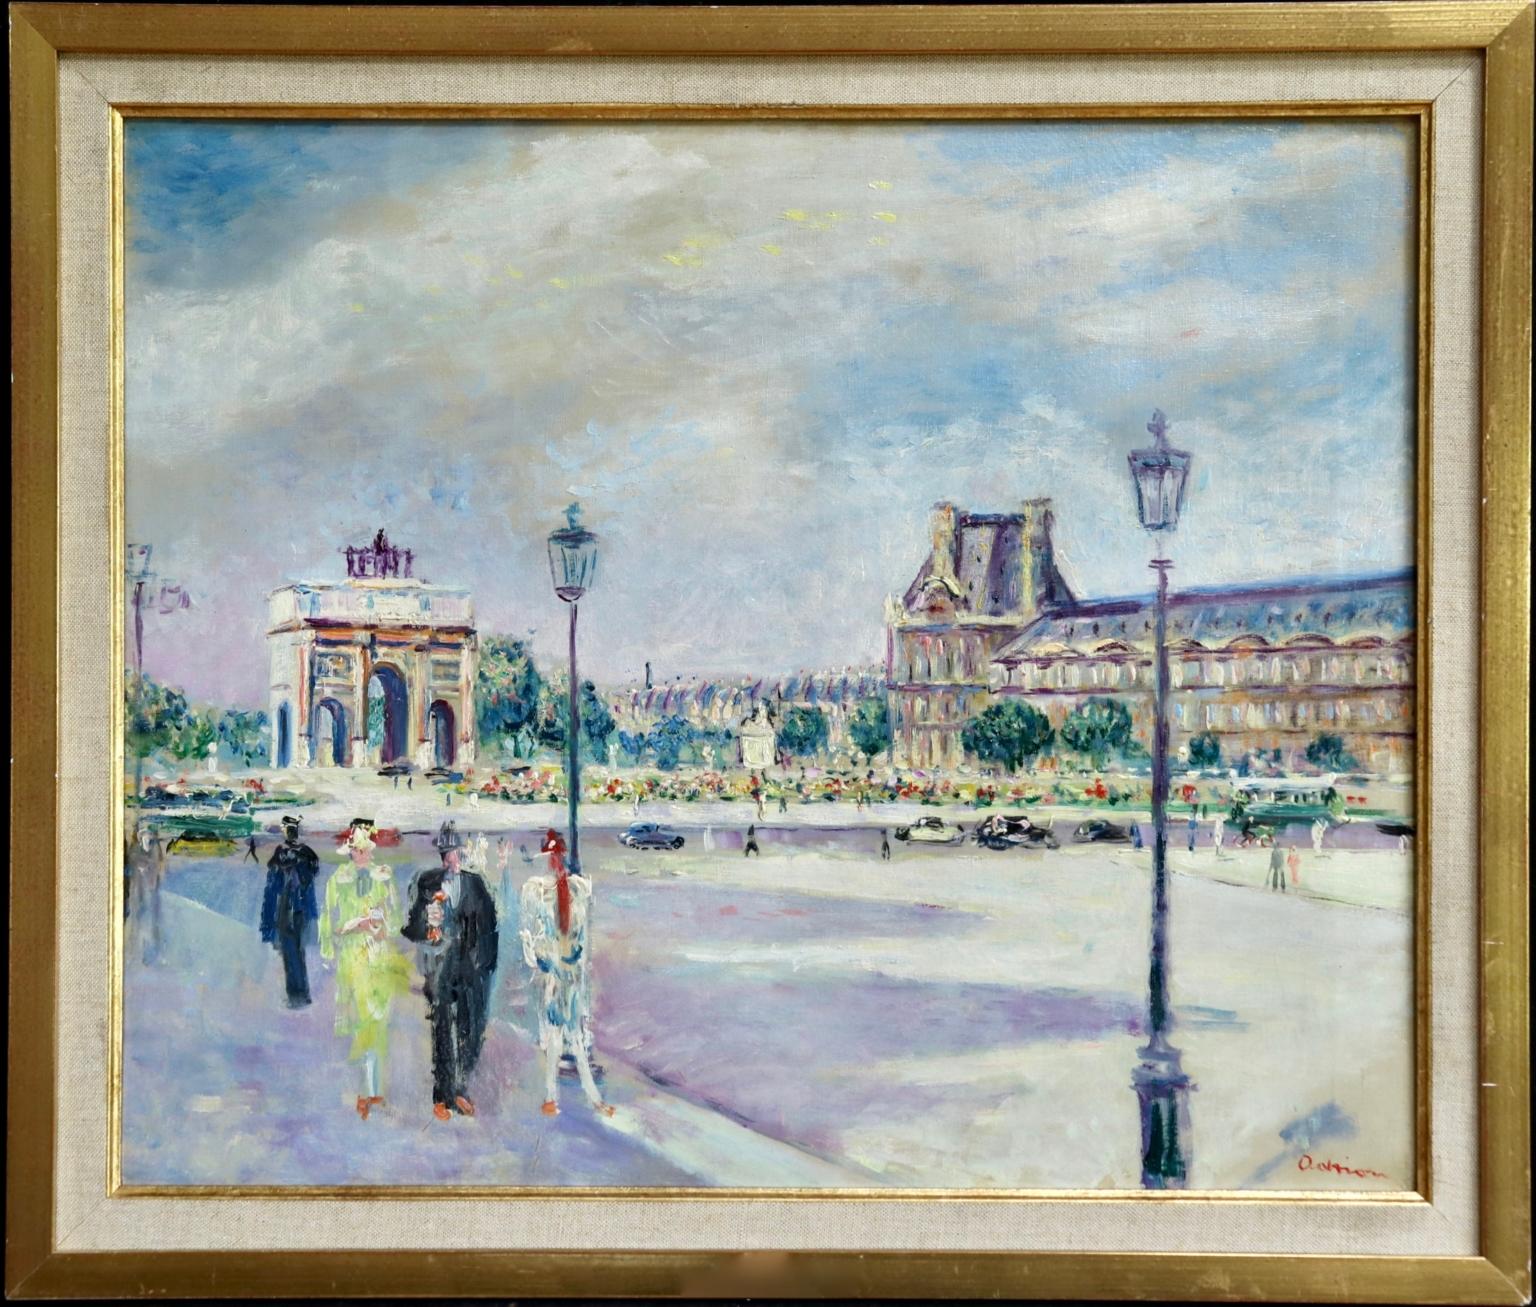 Carrousel du Louvre - Post Impressionist Oil, Figures in Cityscape by L Adrion - Painting by Lucien Adrion